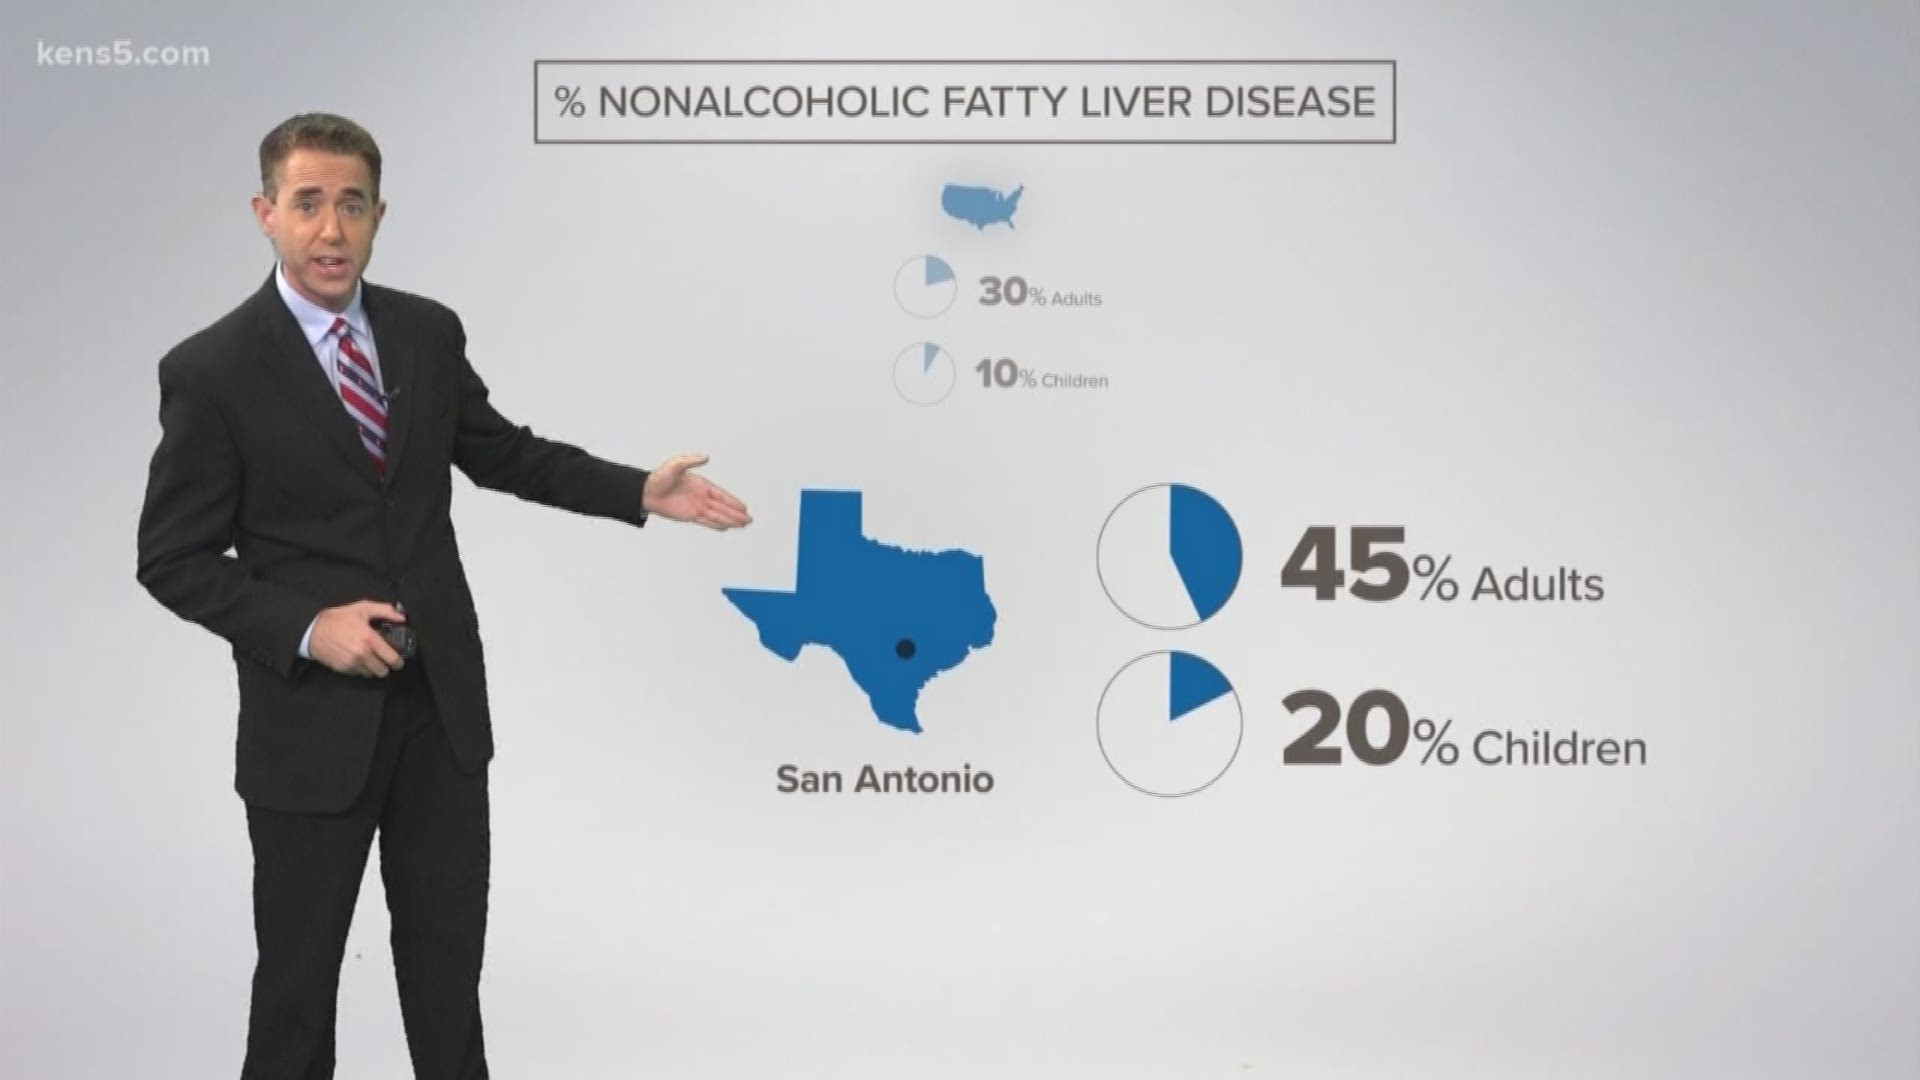 100 million Americans are estimated to have fatty liver disease not caused by alcohol.